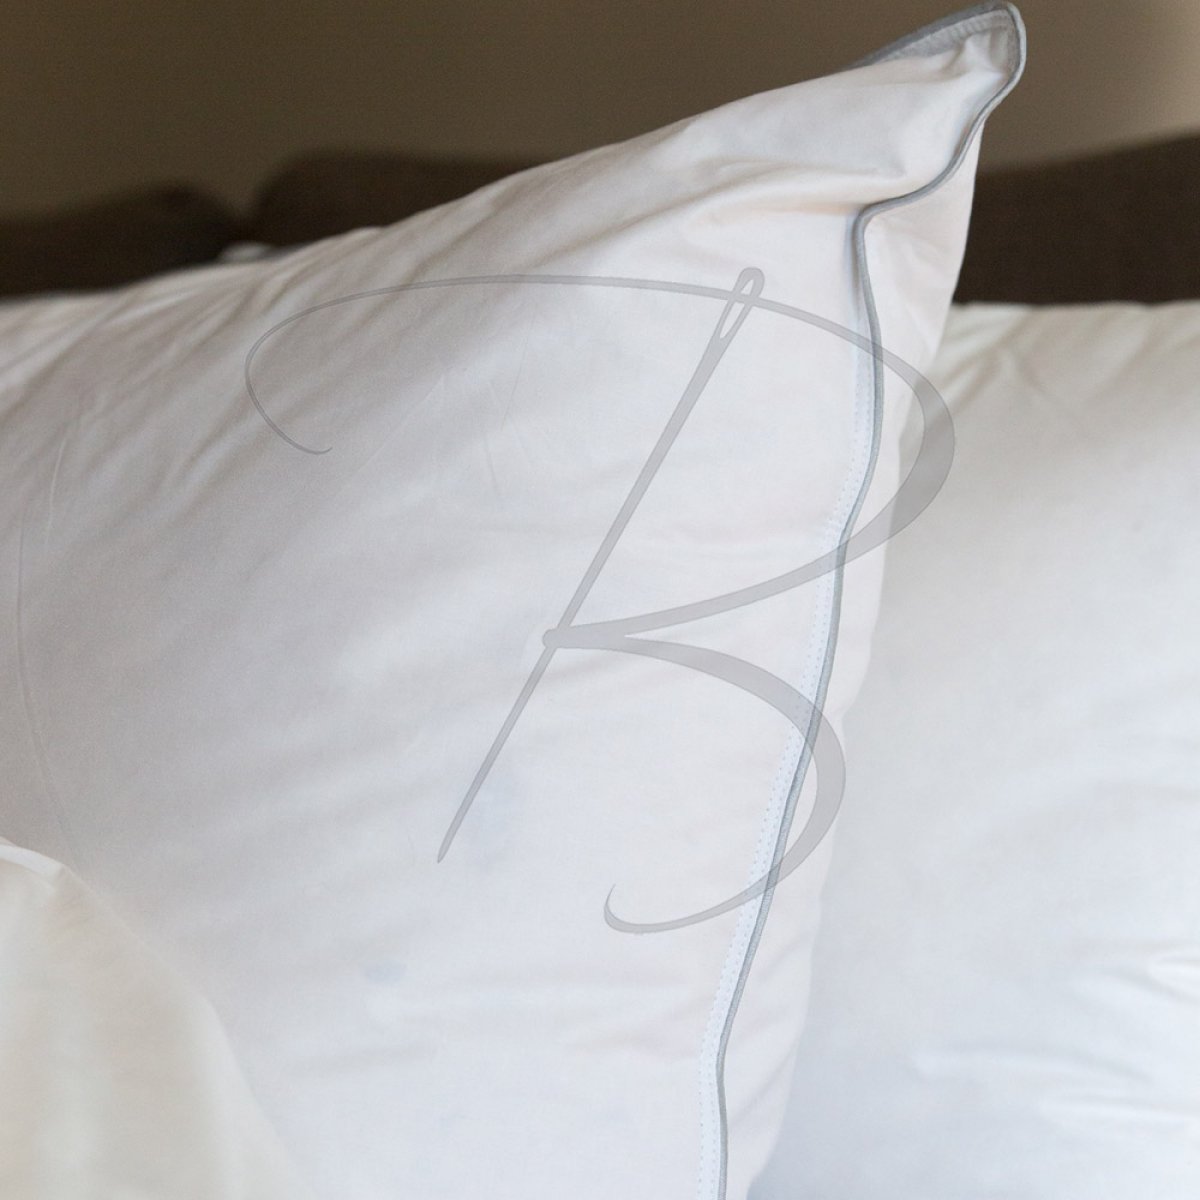 Hotel pillow - Synthetic pillow EVEREST